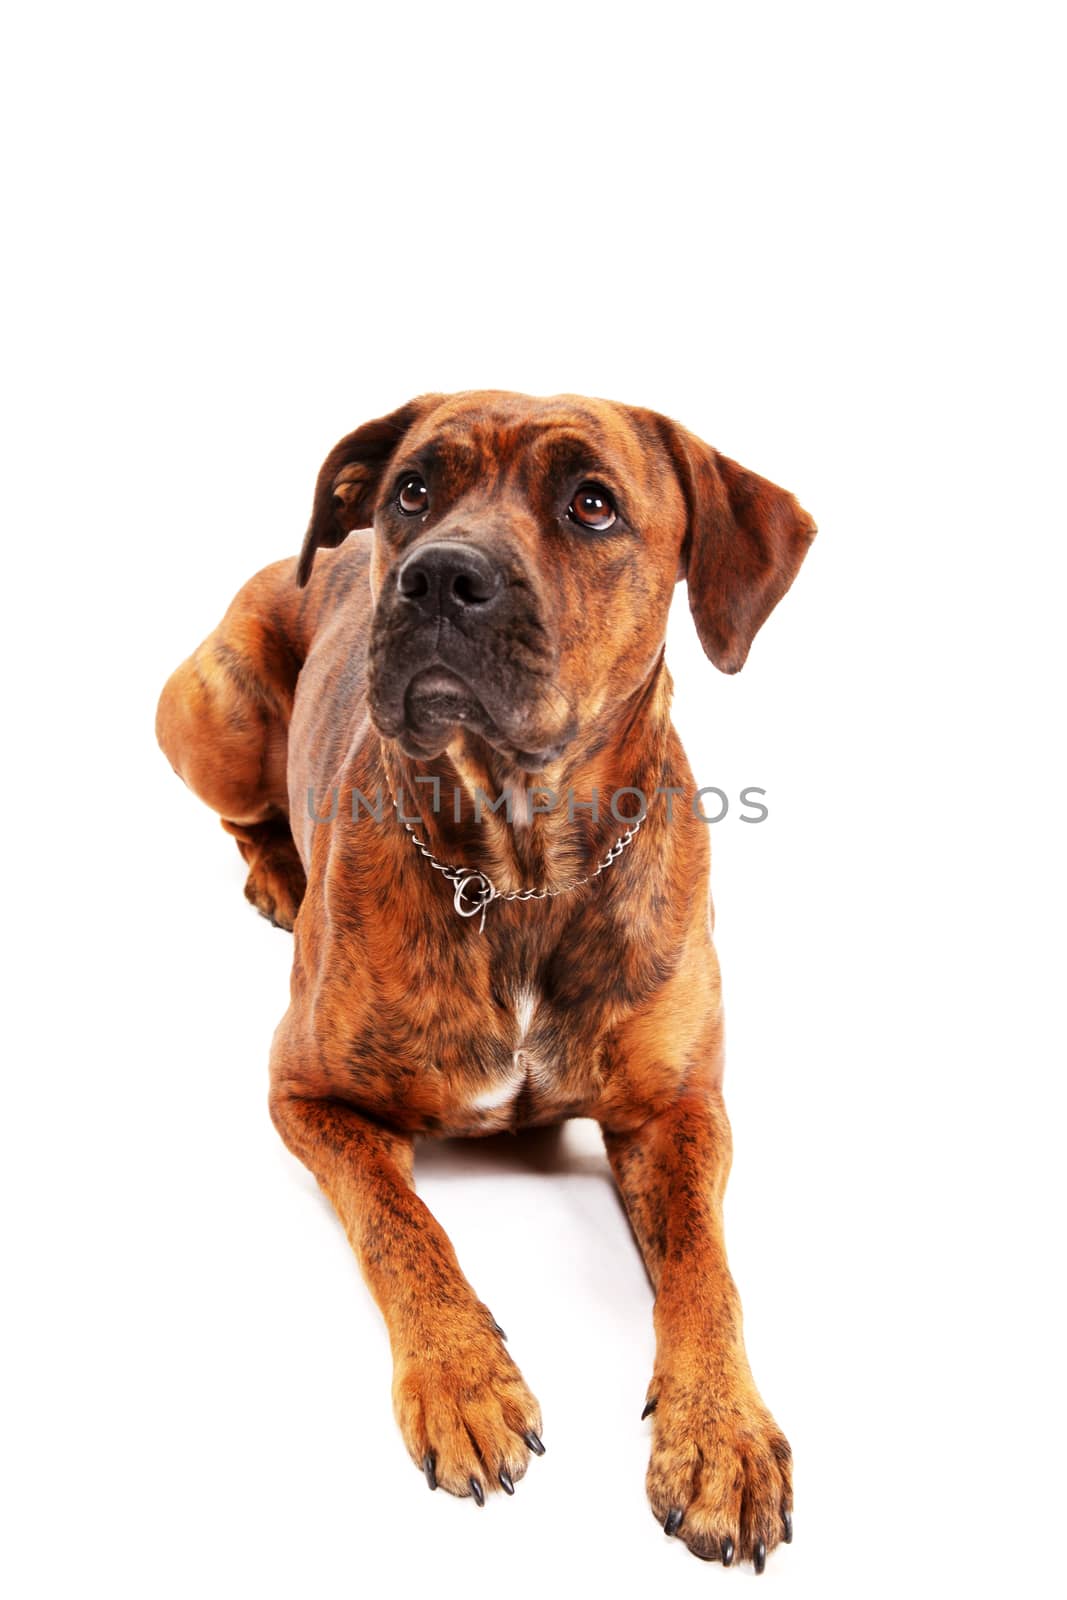 Boxer dog in front of white background